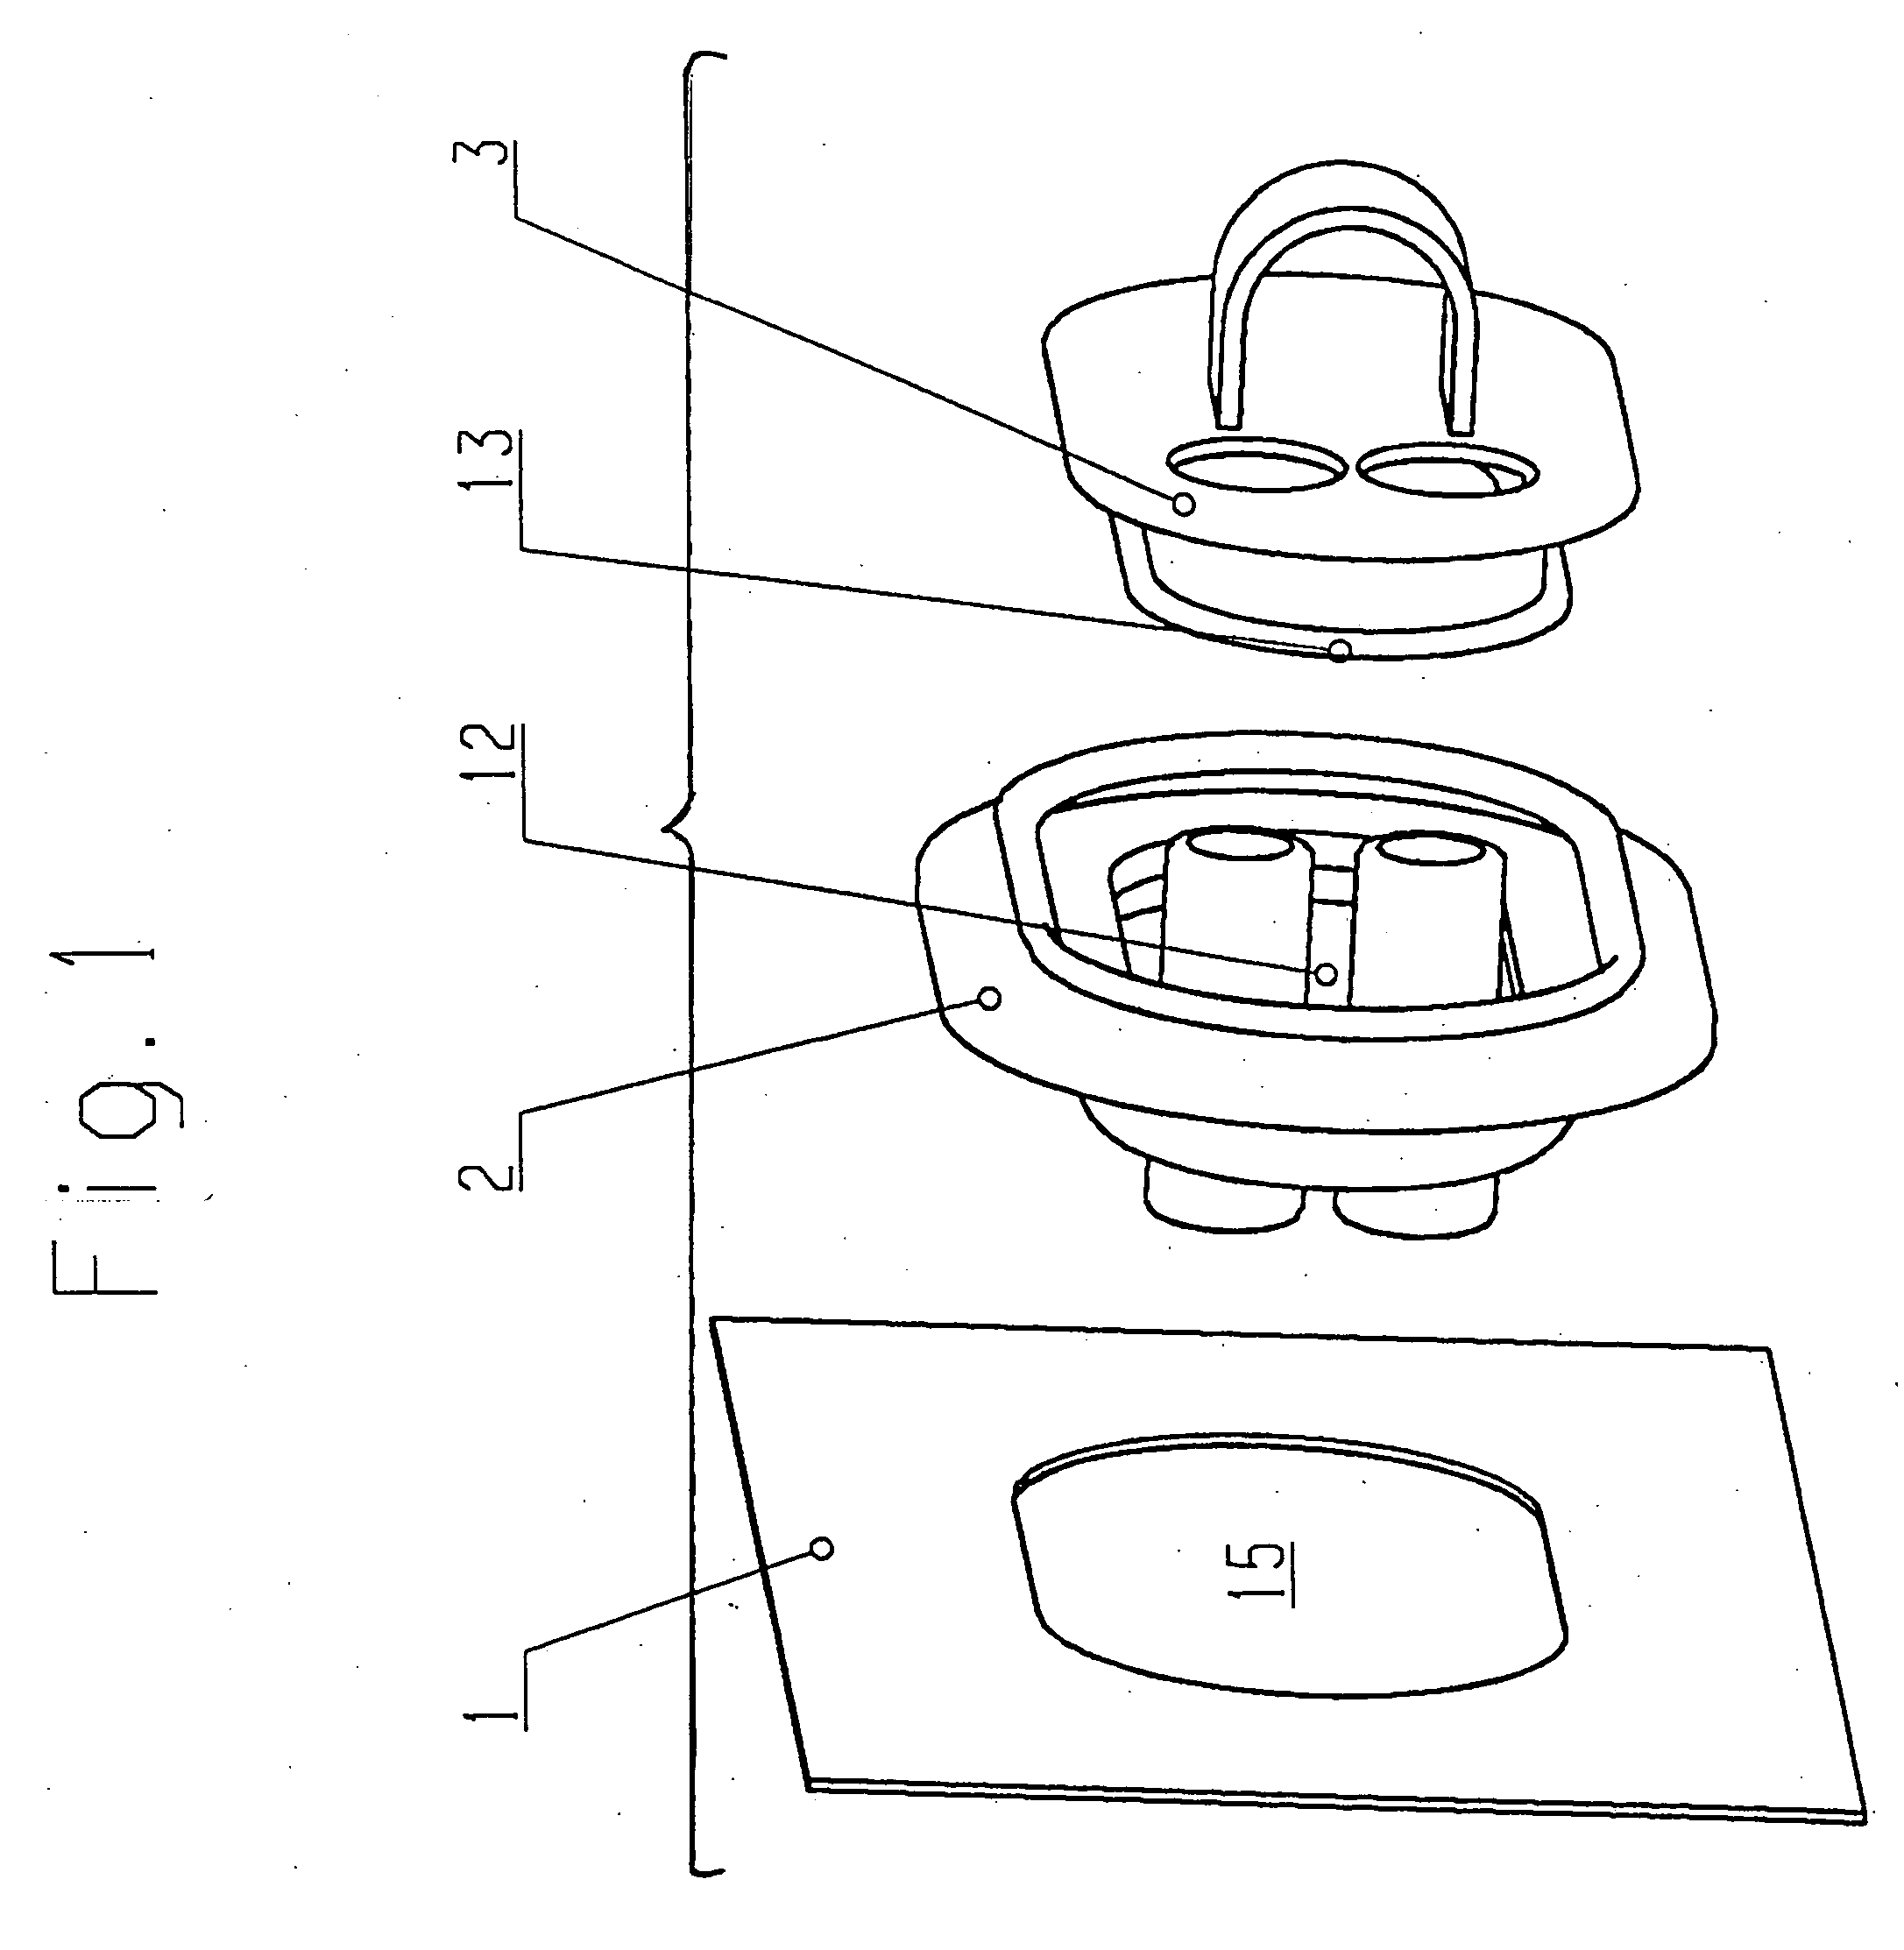 Gasket for a cable control line in an engine compartment